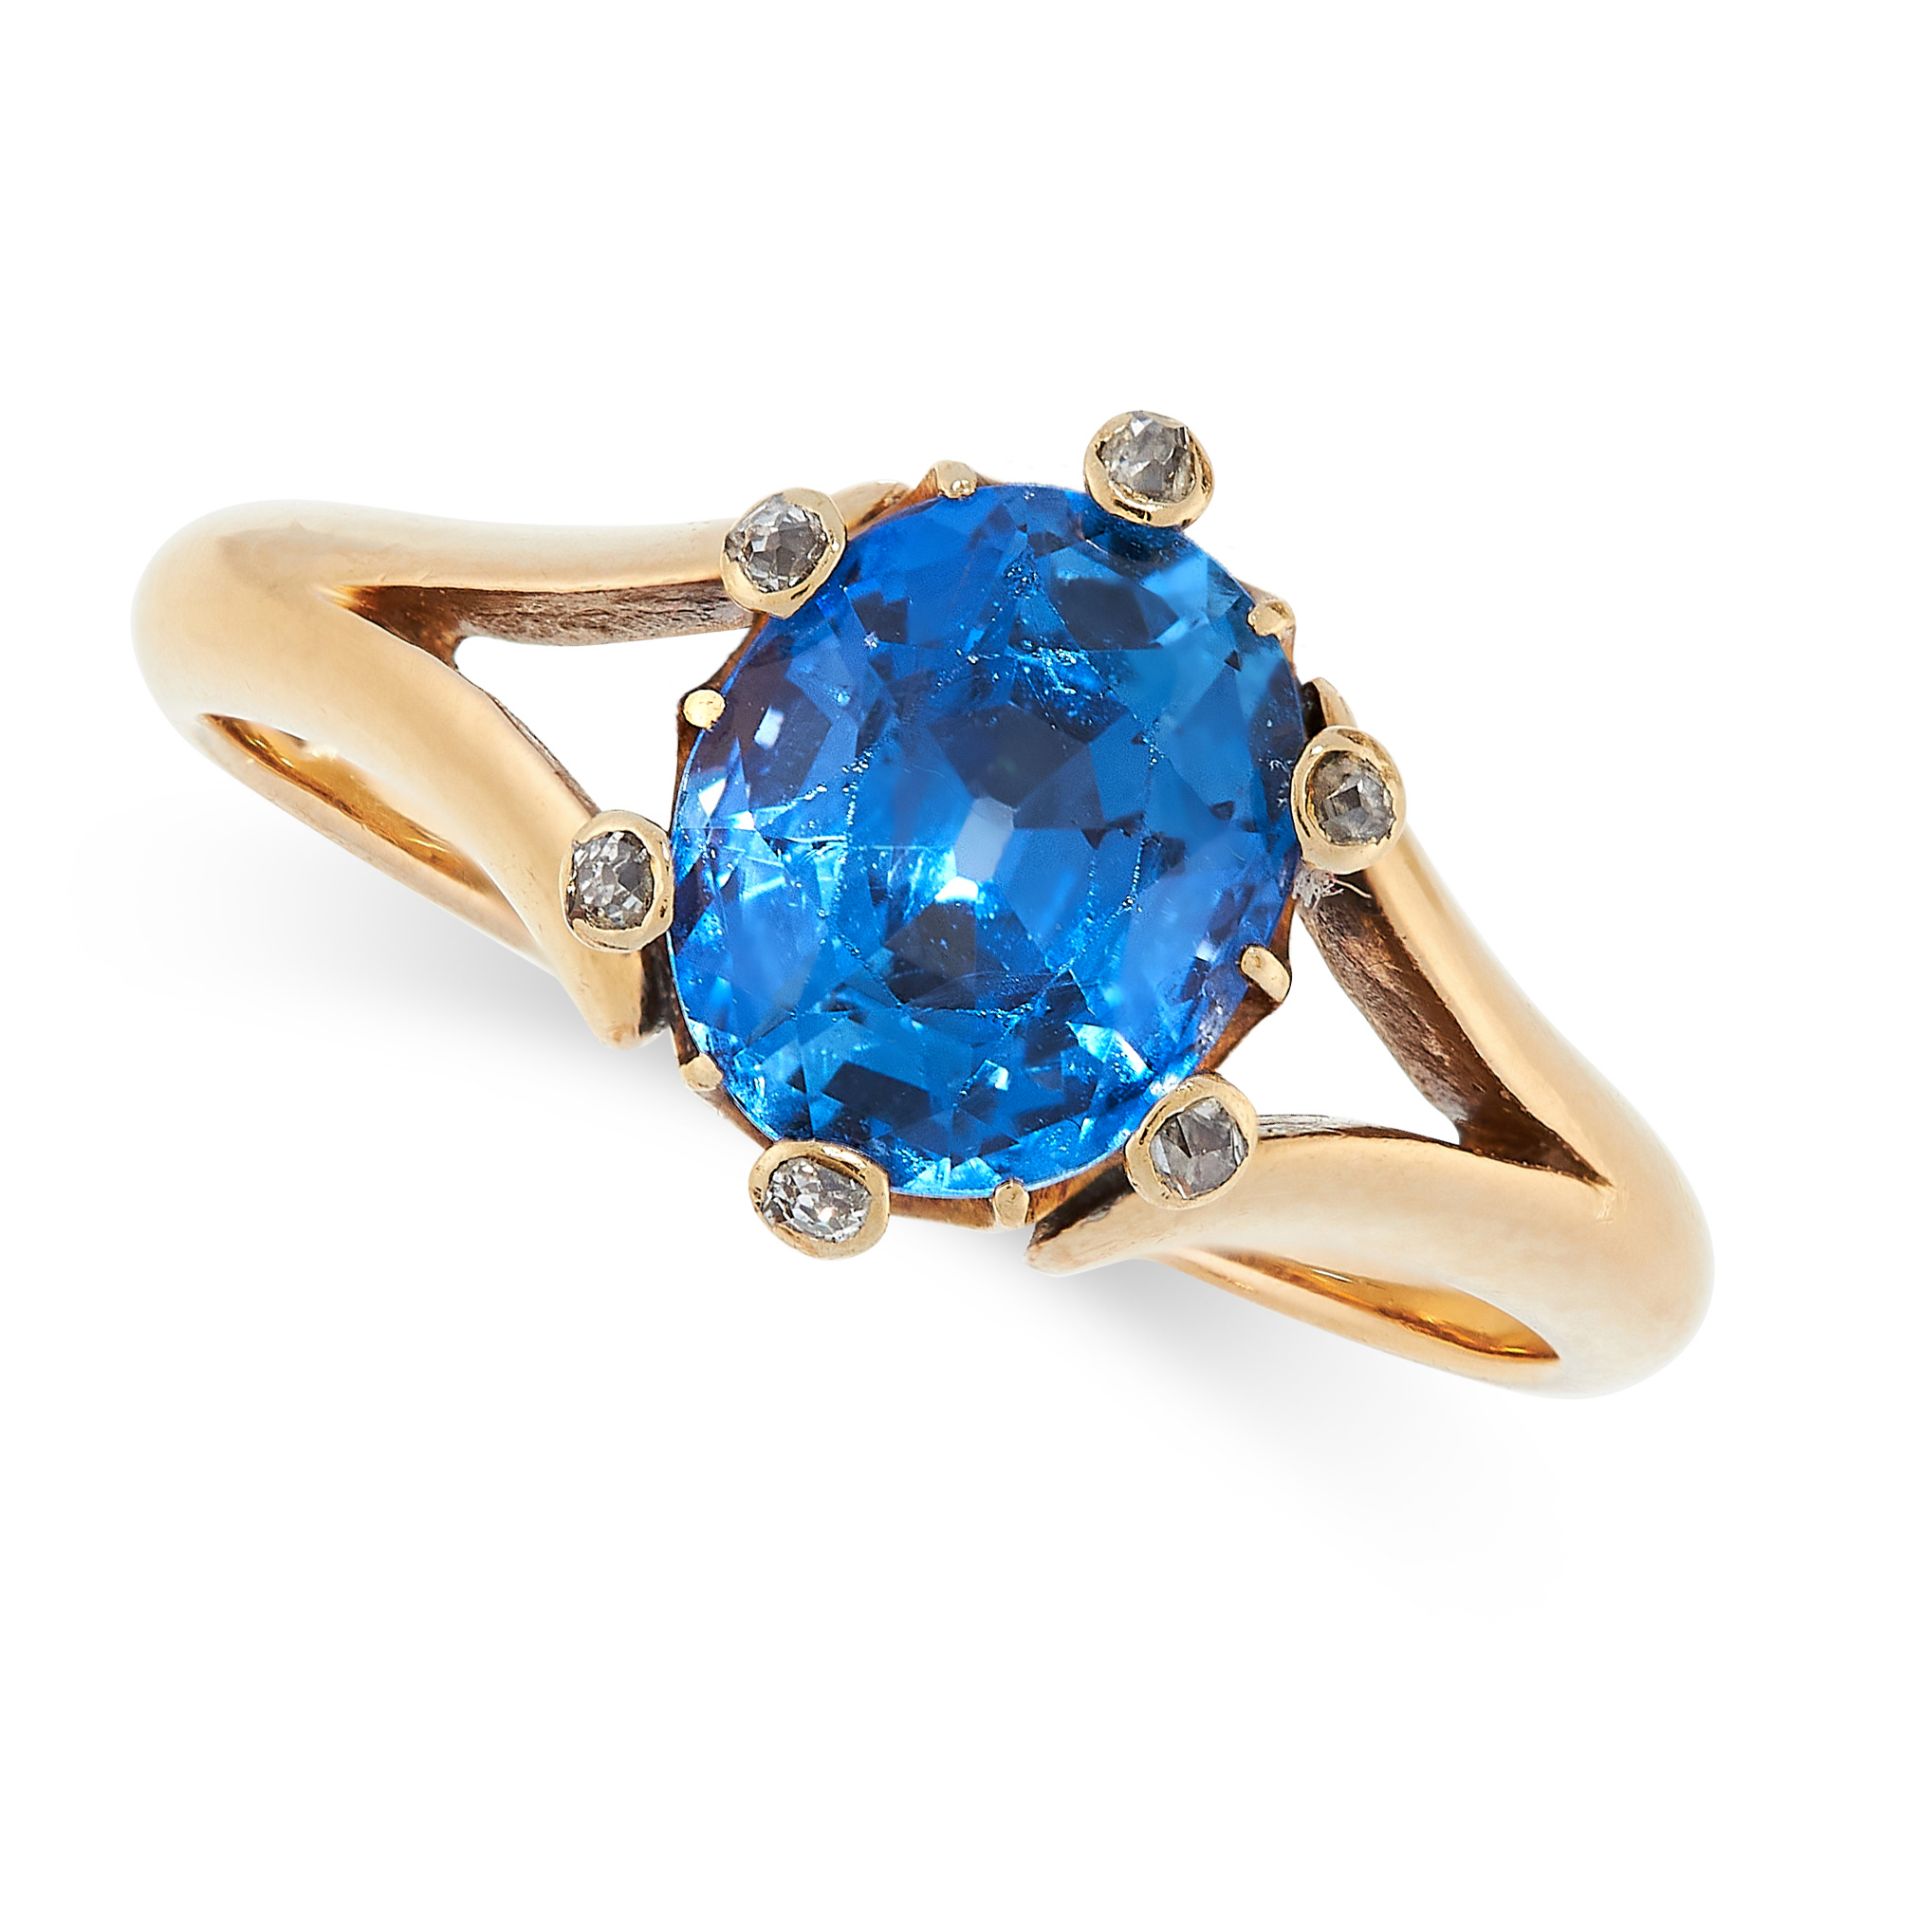 SAPPHIRE AND DIAMOND RING set with a mixed-oval cut sapphire of 2.21 carats in a border of six